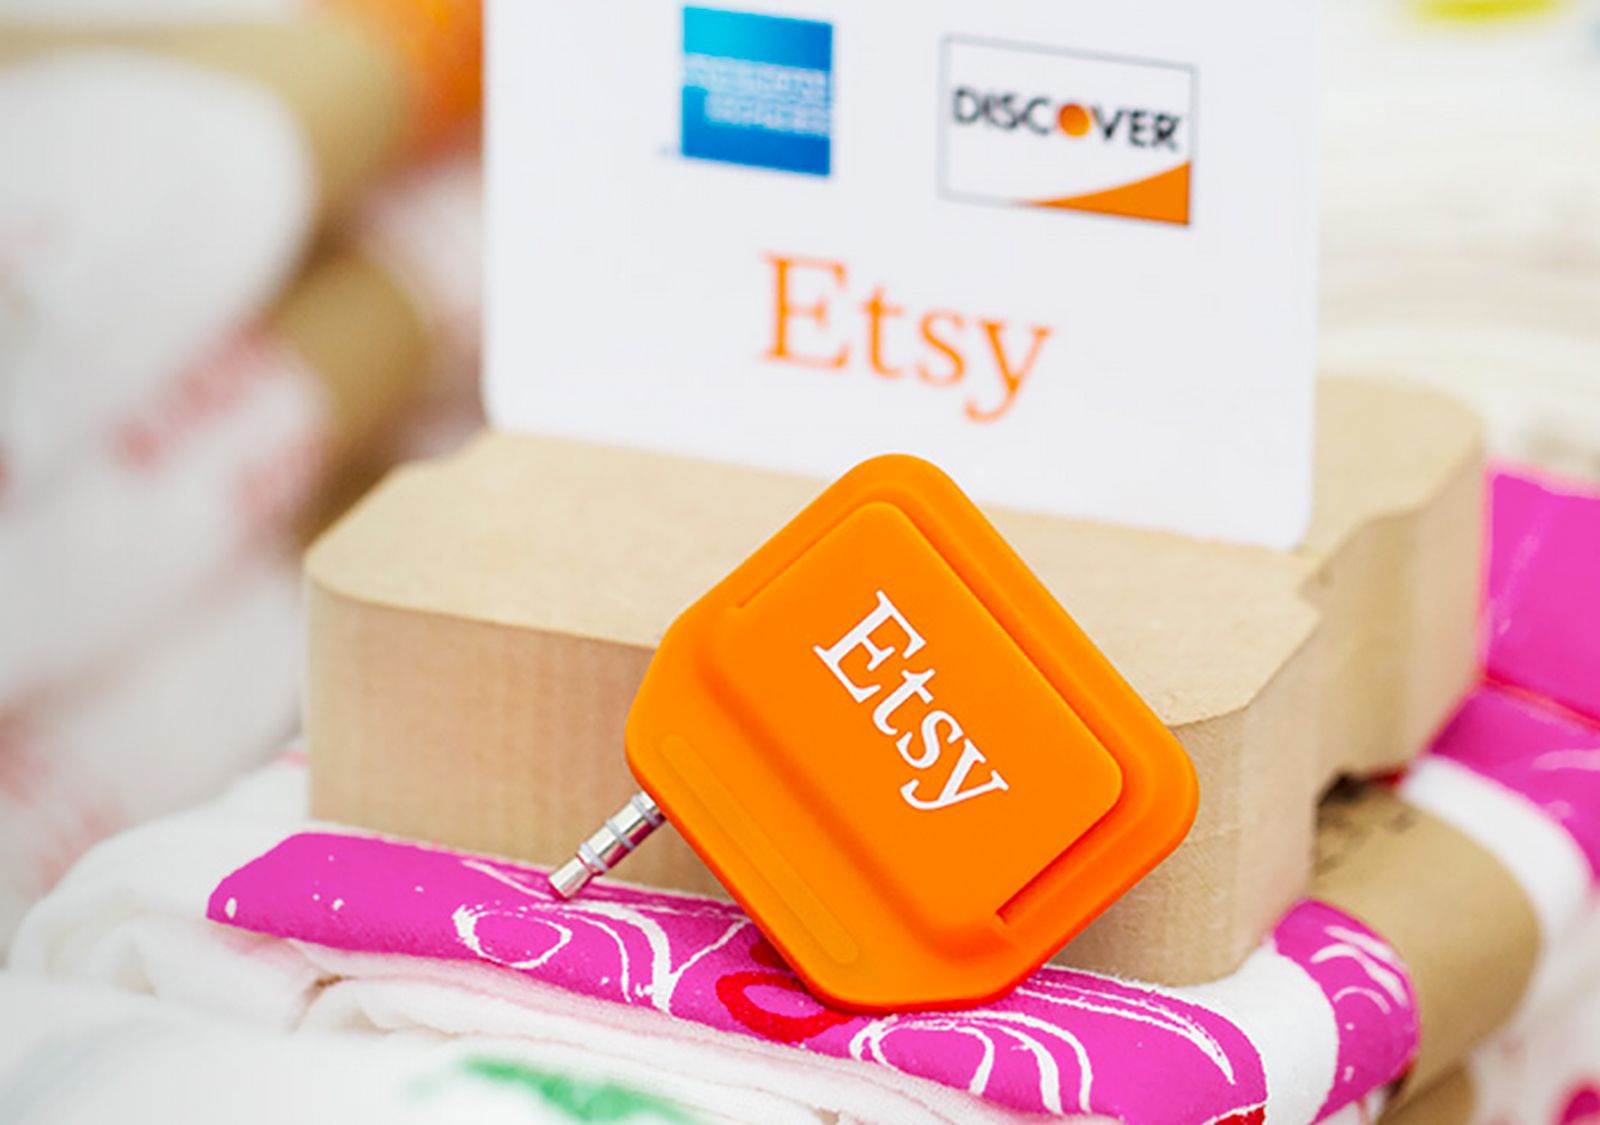 etsy debuts free square like credit card reader for real world sellers image 2